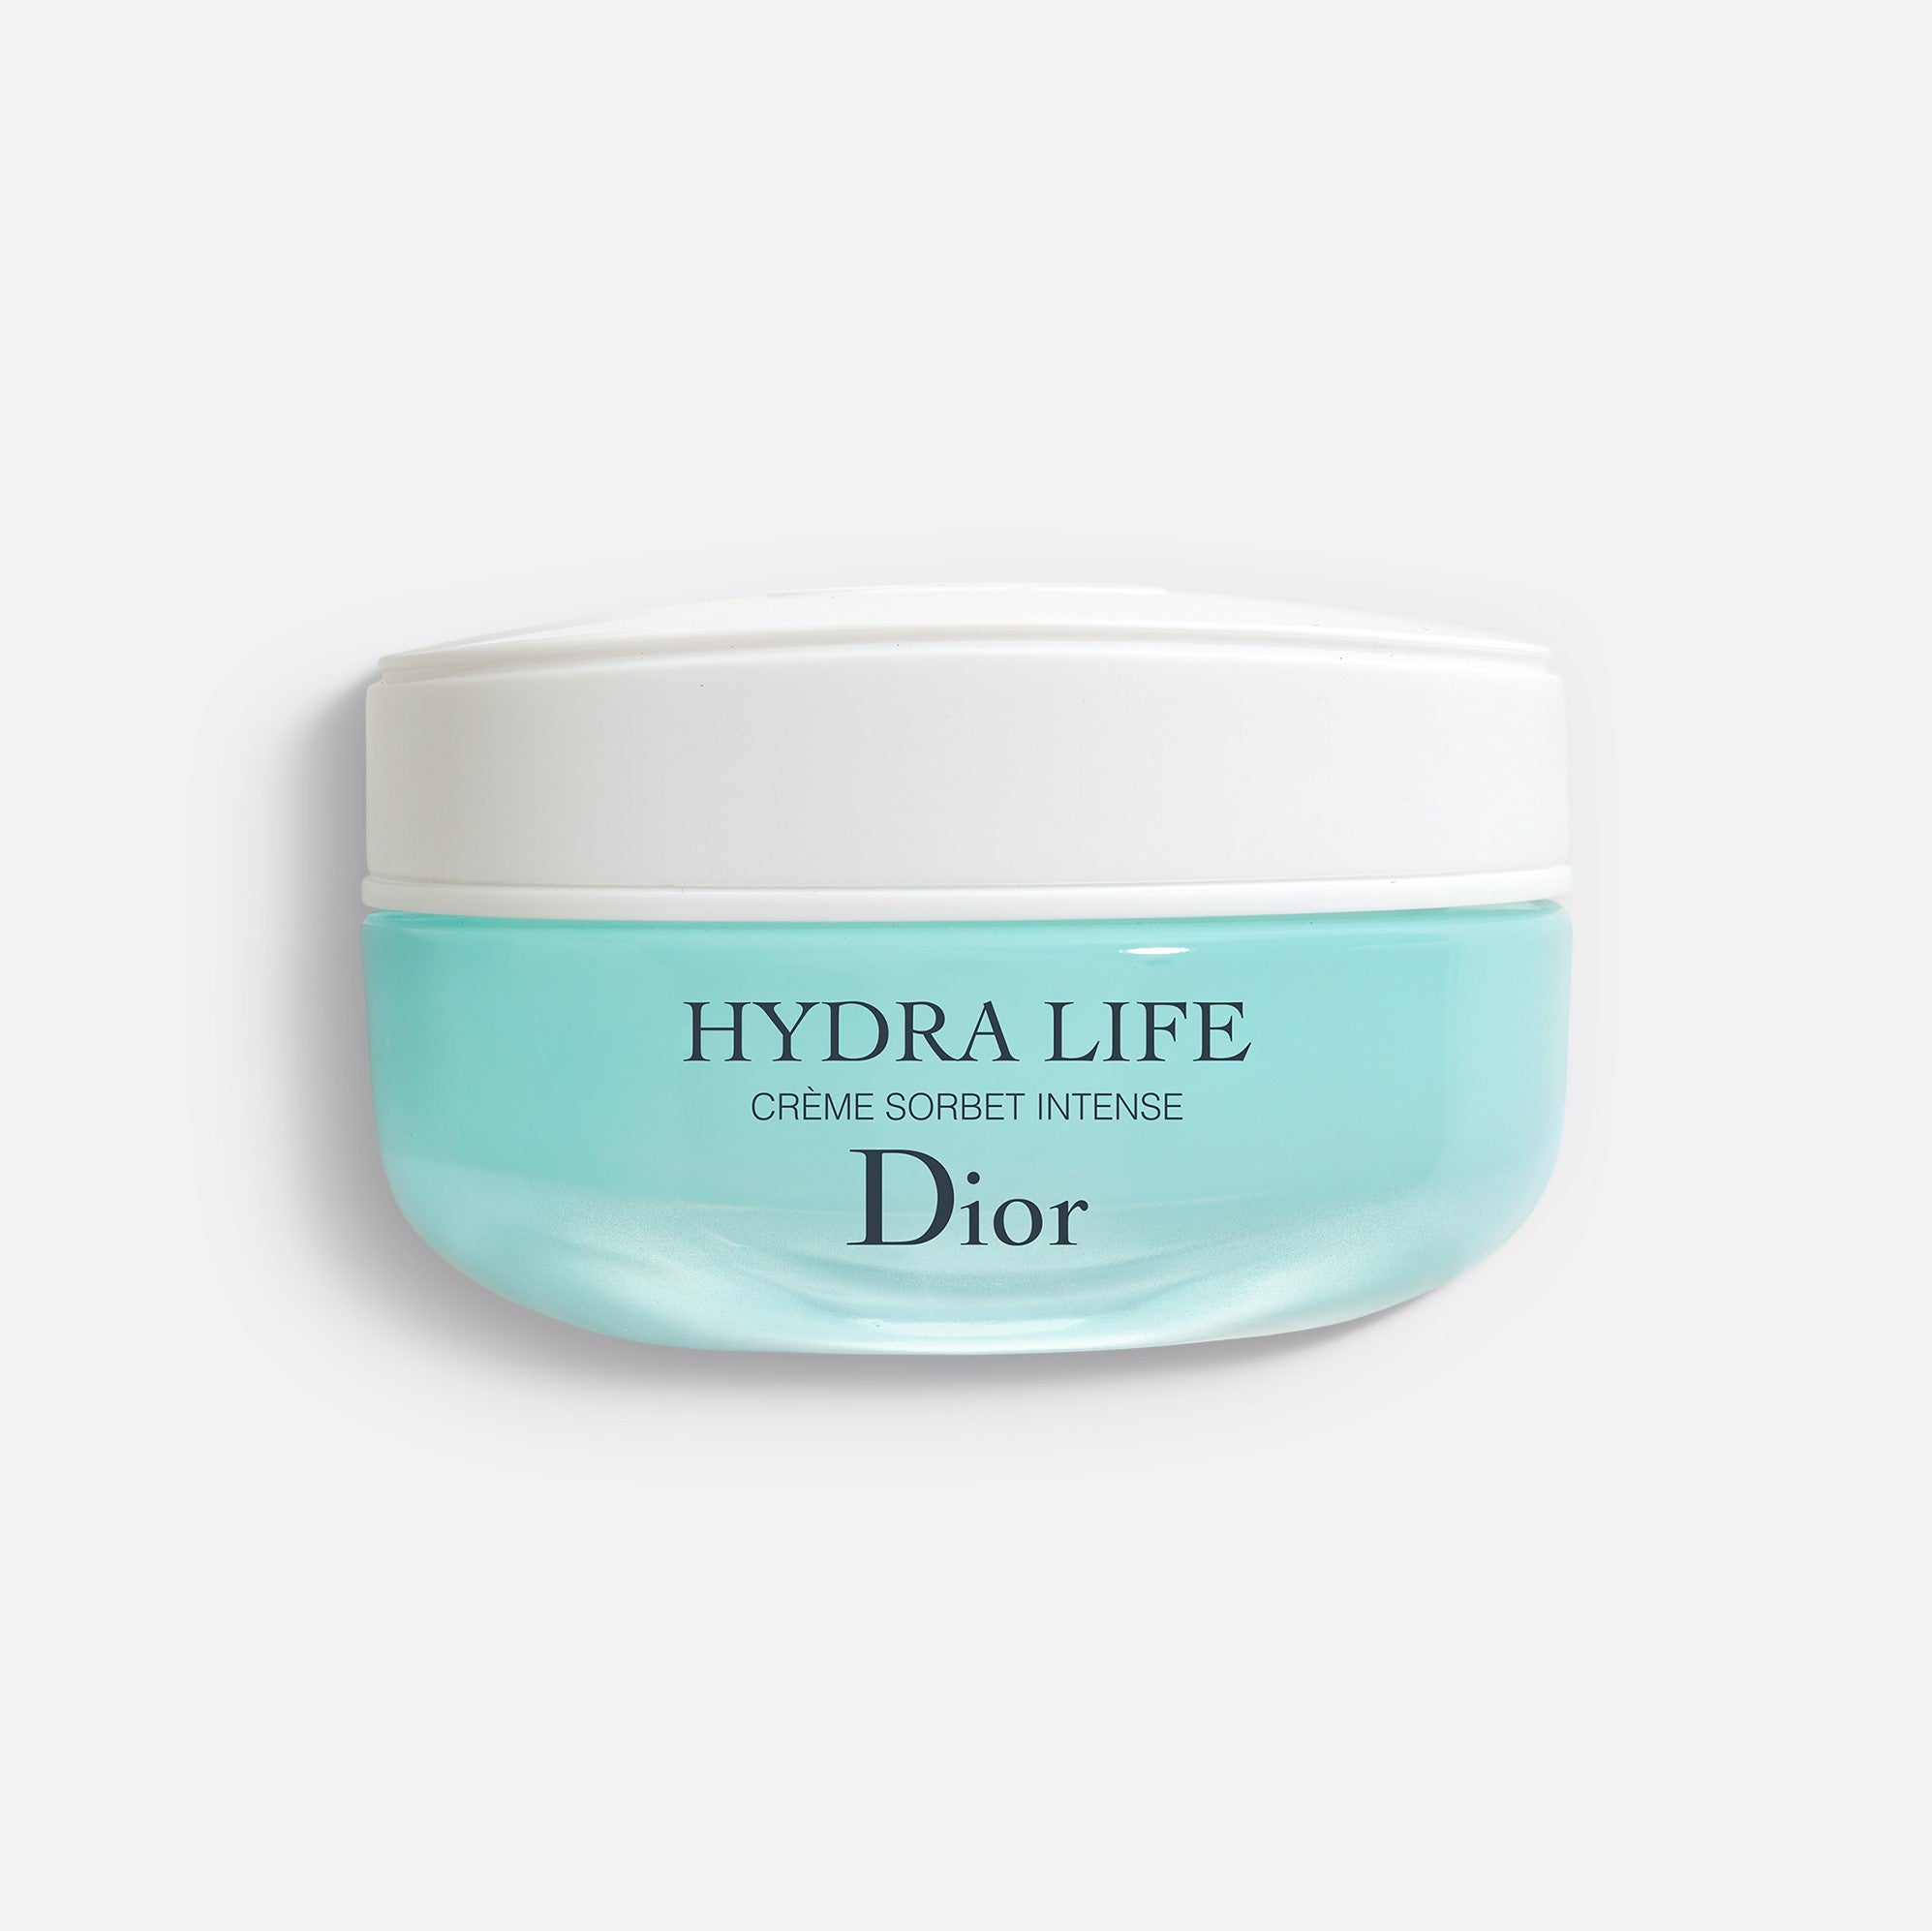 DIOR HYDRA LIFE INTENSE SORBET CREME | Hydrating face and neck cream - hydrates, nourishes and enhances